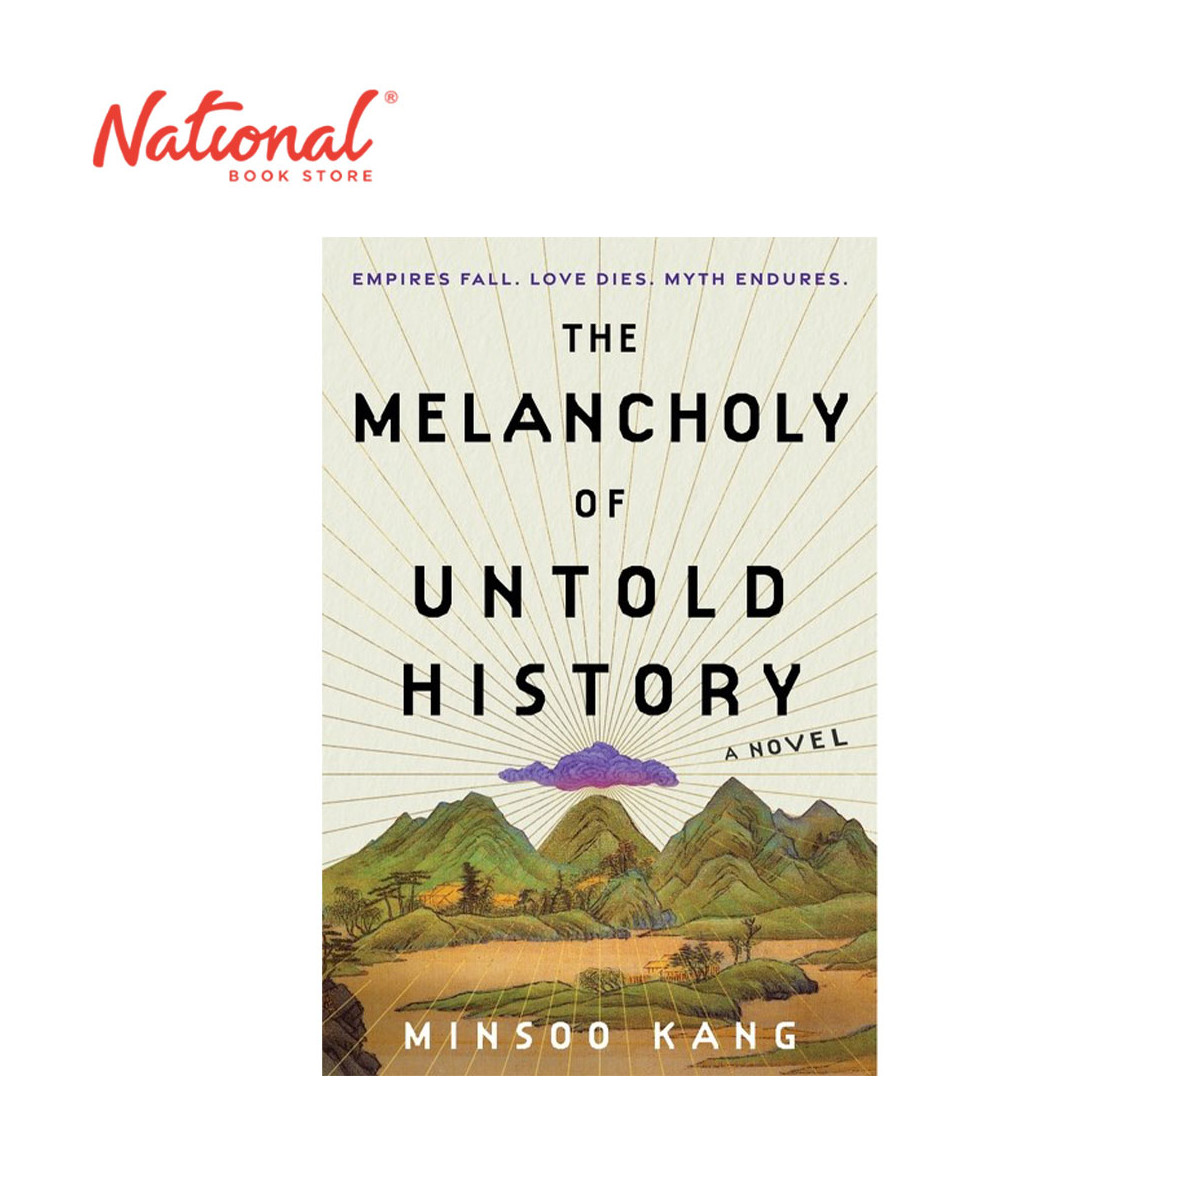 *PRE-ORDER* The Melancholy Of Untold History: A Novel by Minsoo Kang - Hardcover - Contemporary Fiction